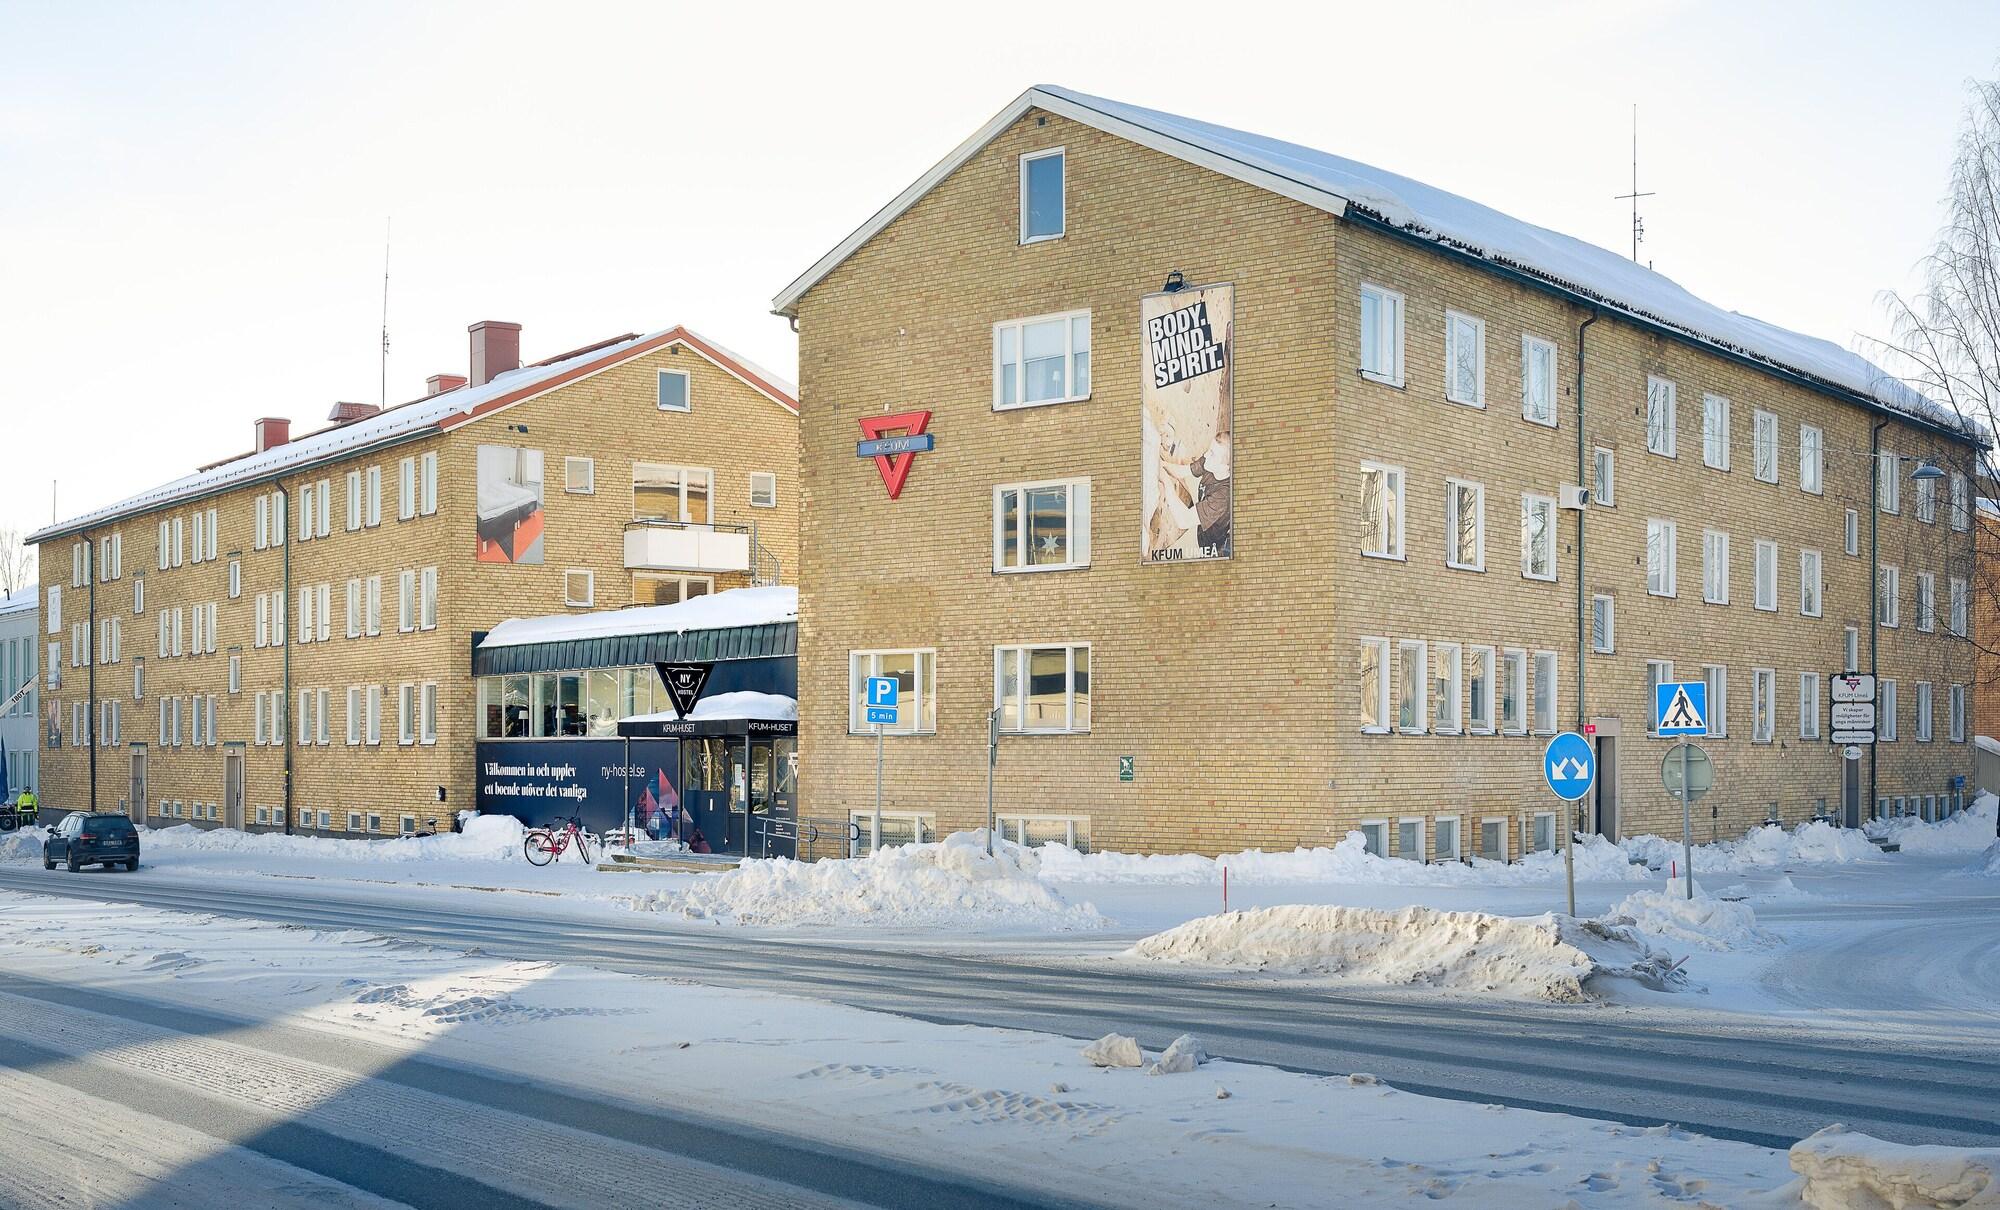 YMCA Hostel and Hotel image